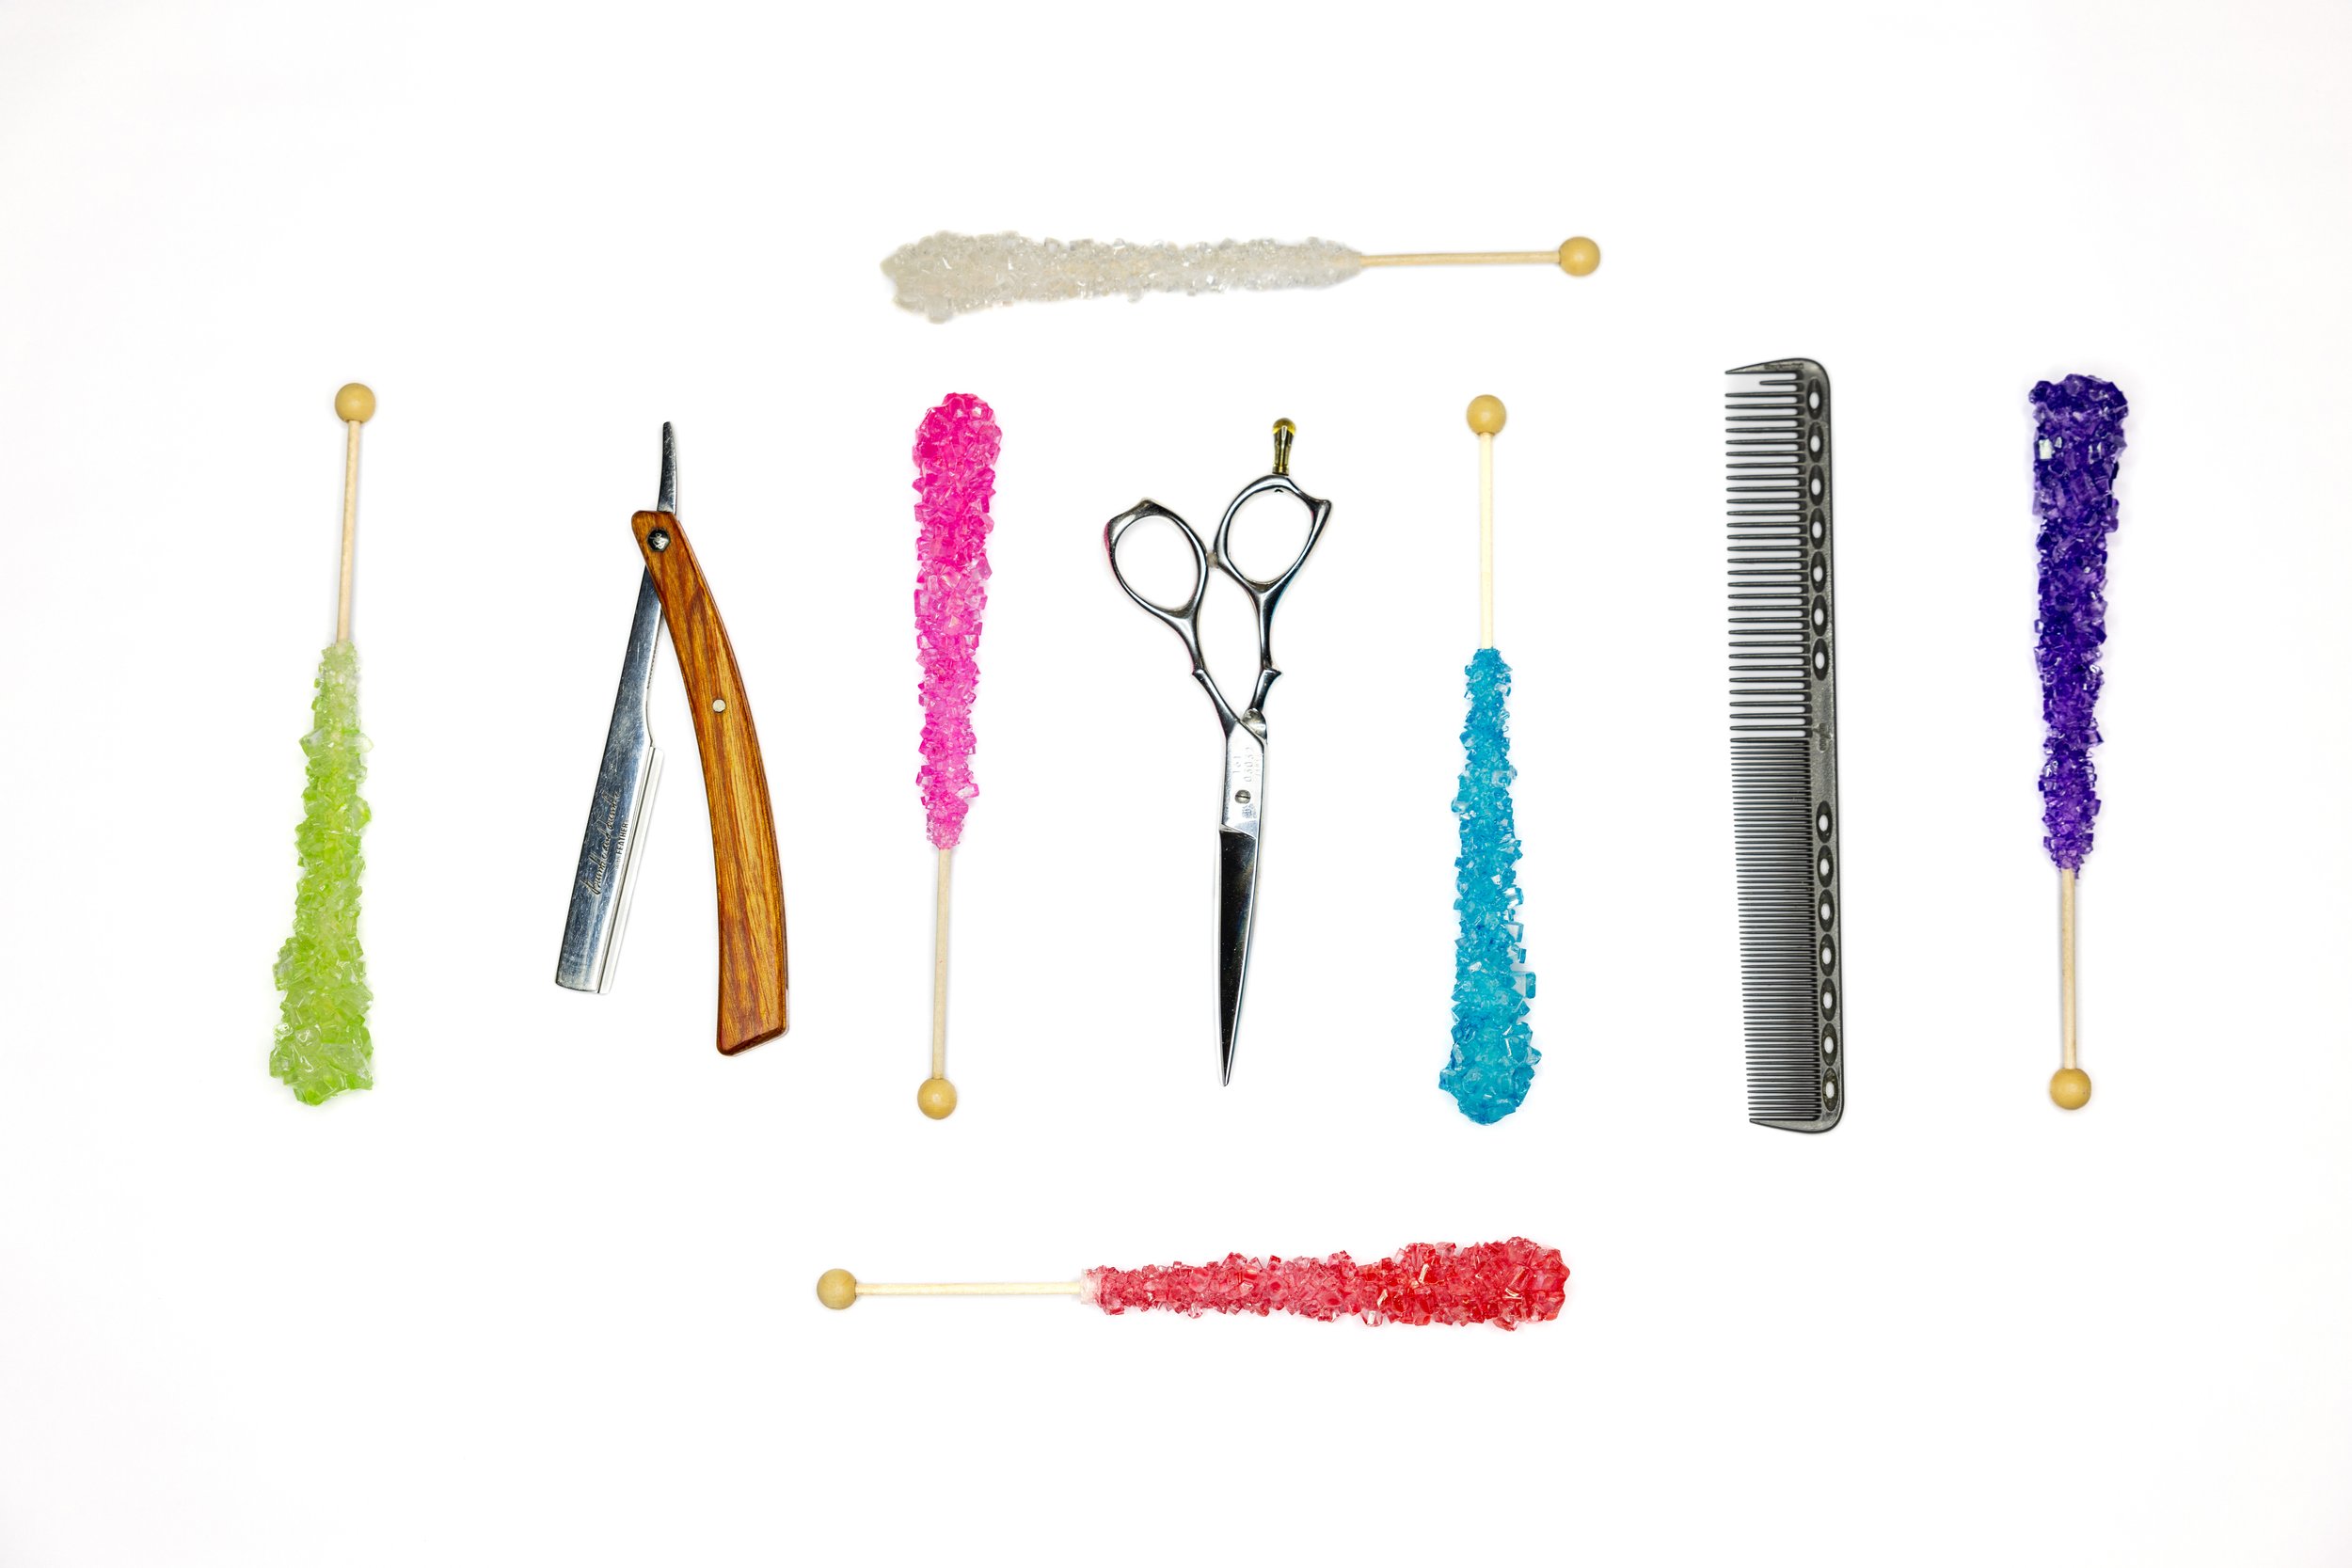 All Sugar Tools With Rock Candy (1).jpg